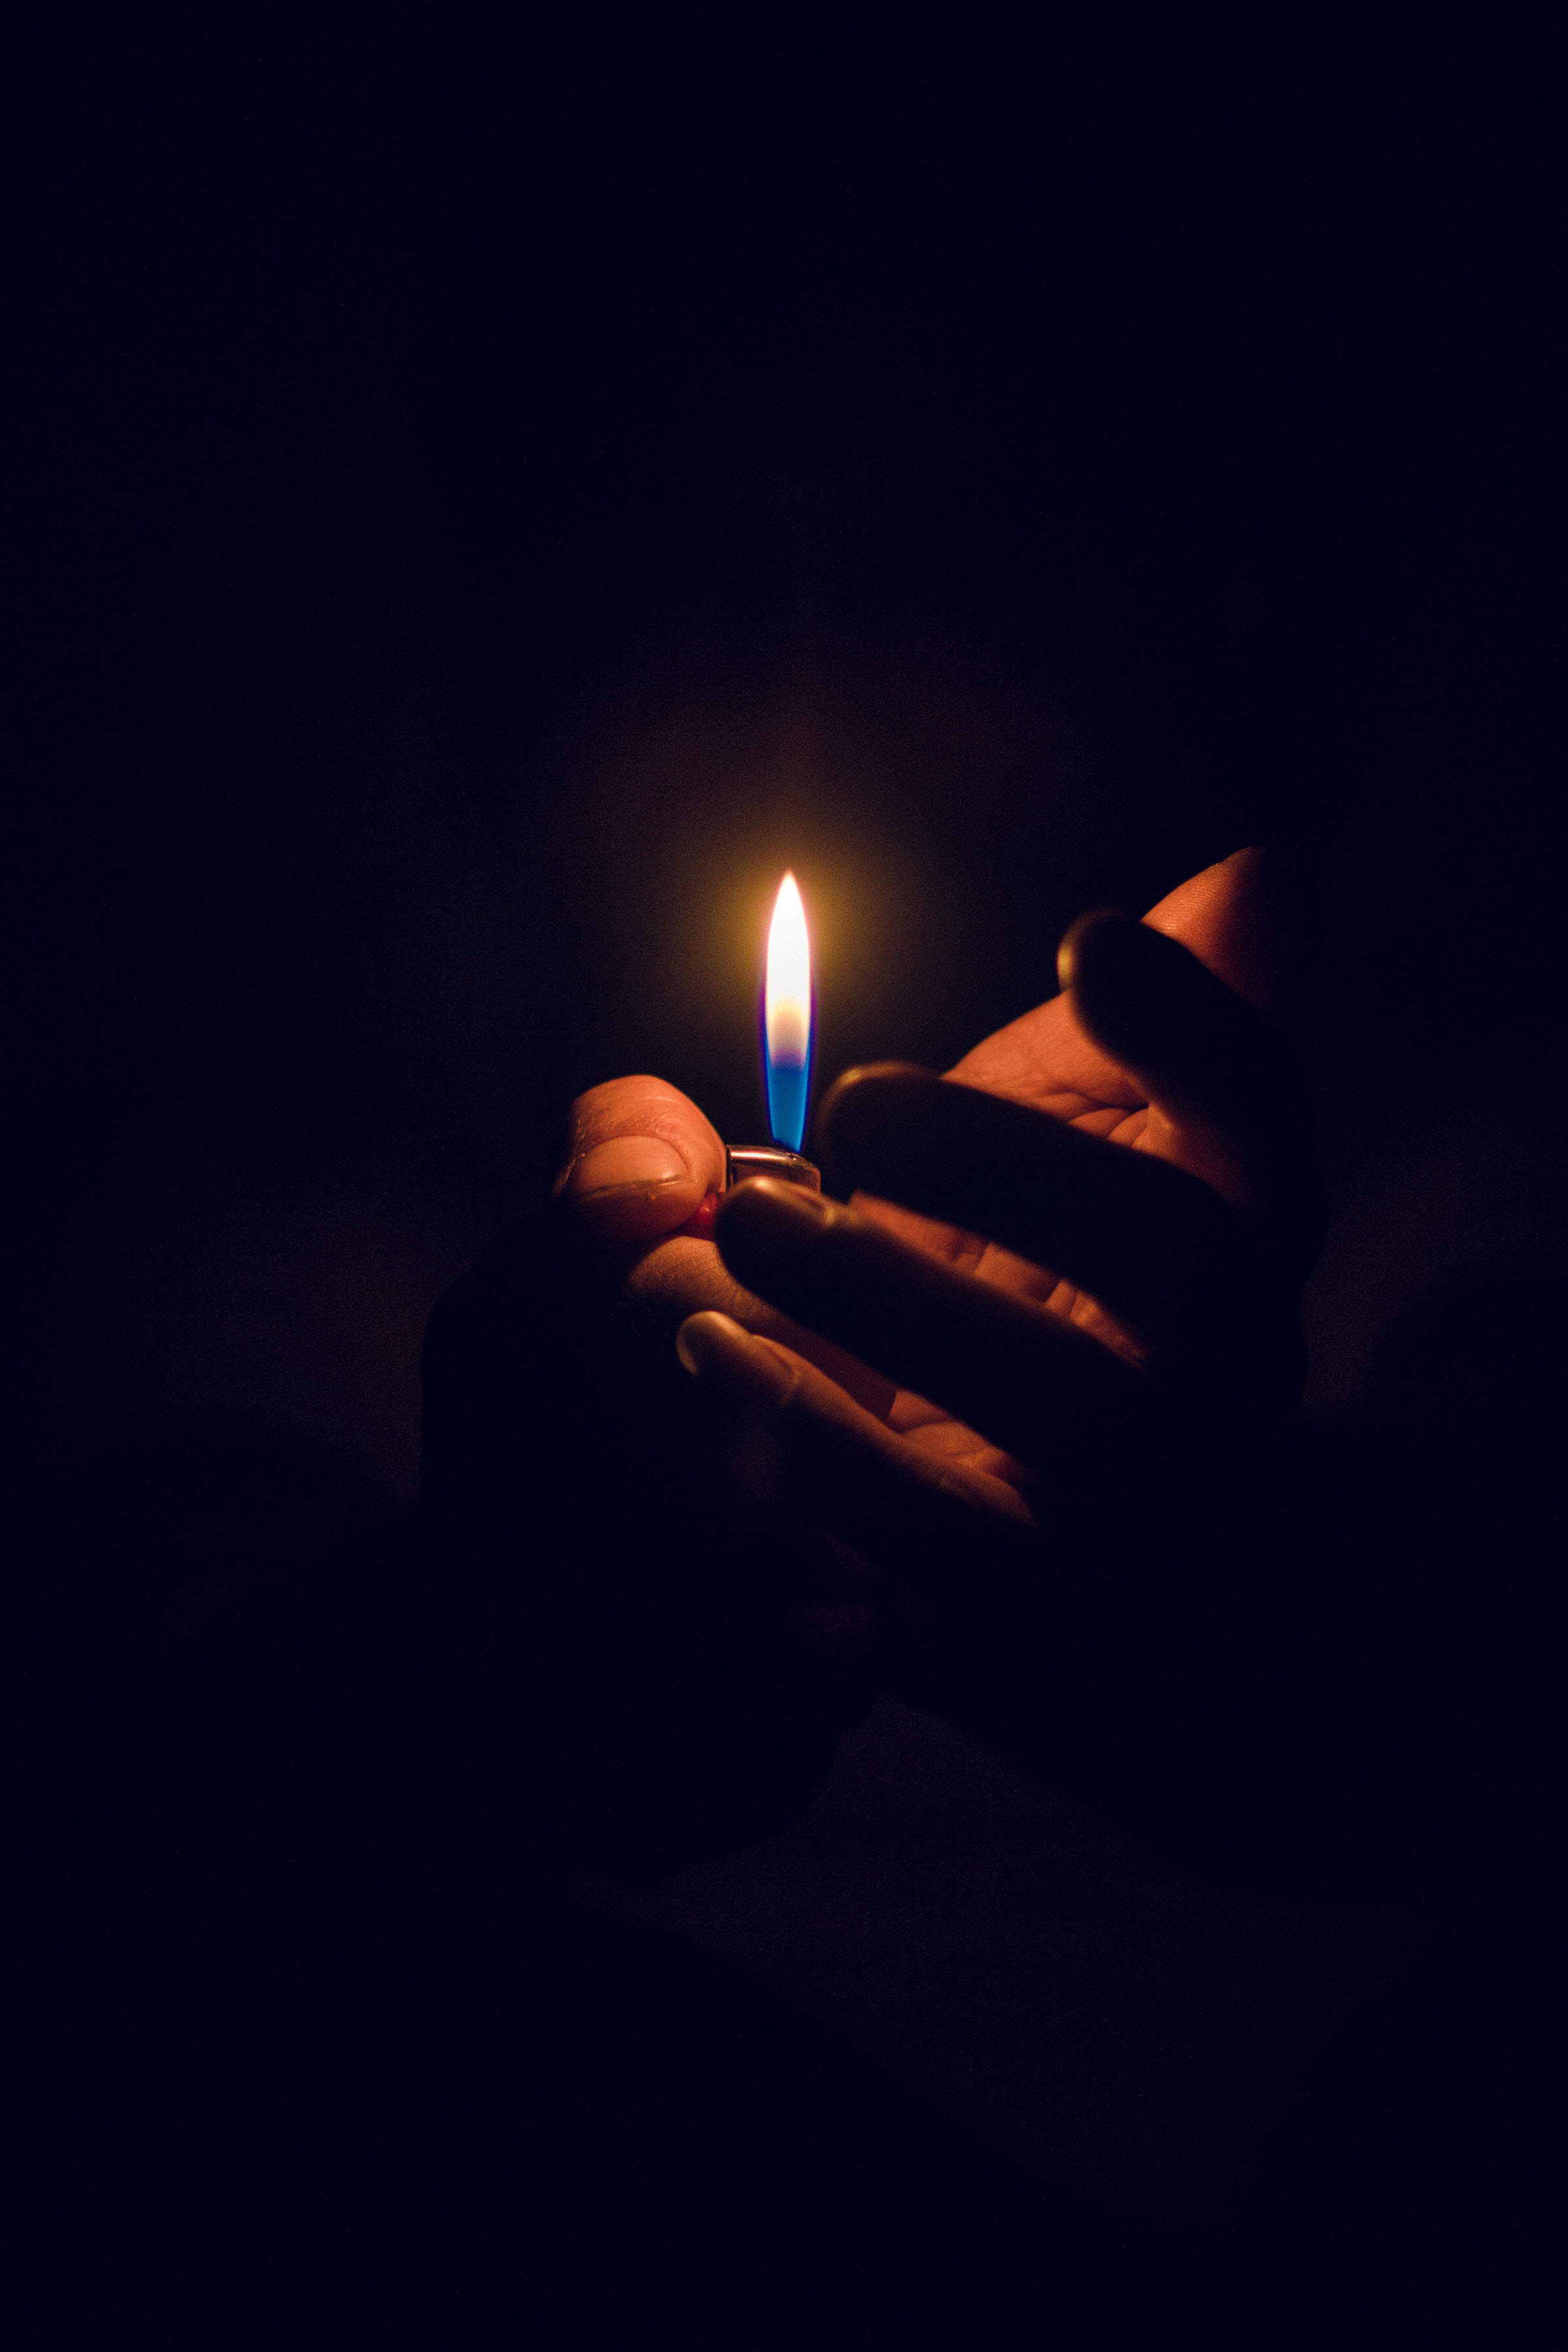 flame, hand, dark, candle cellphone